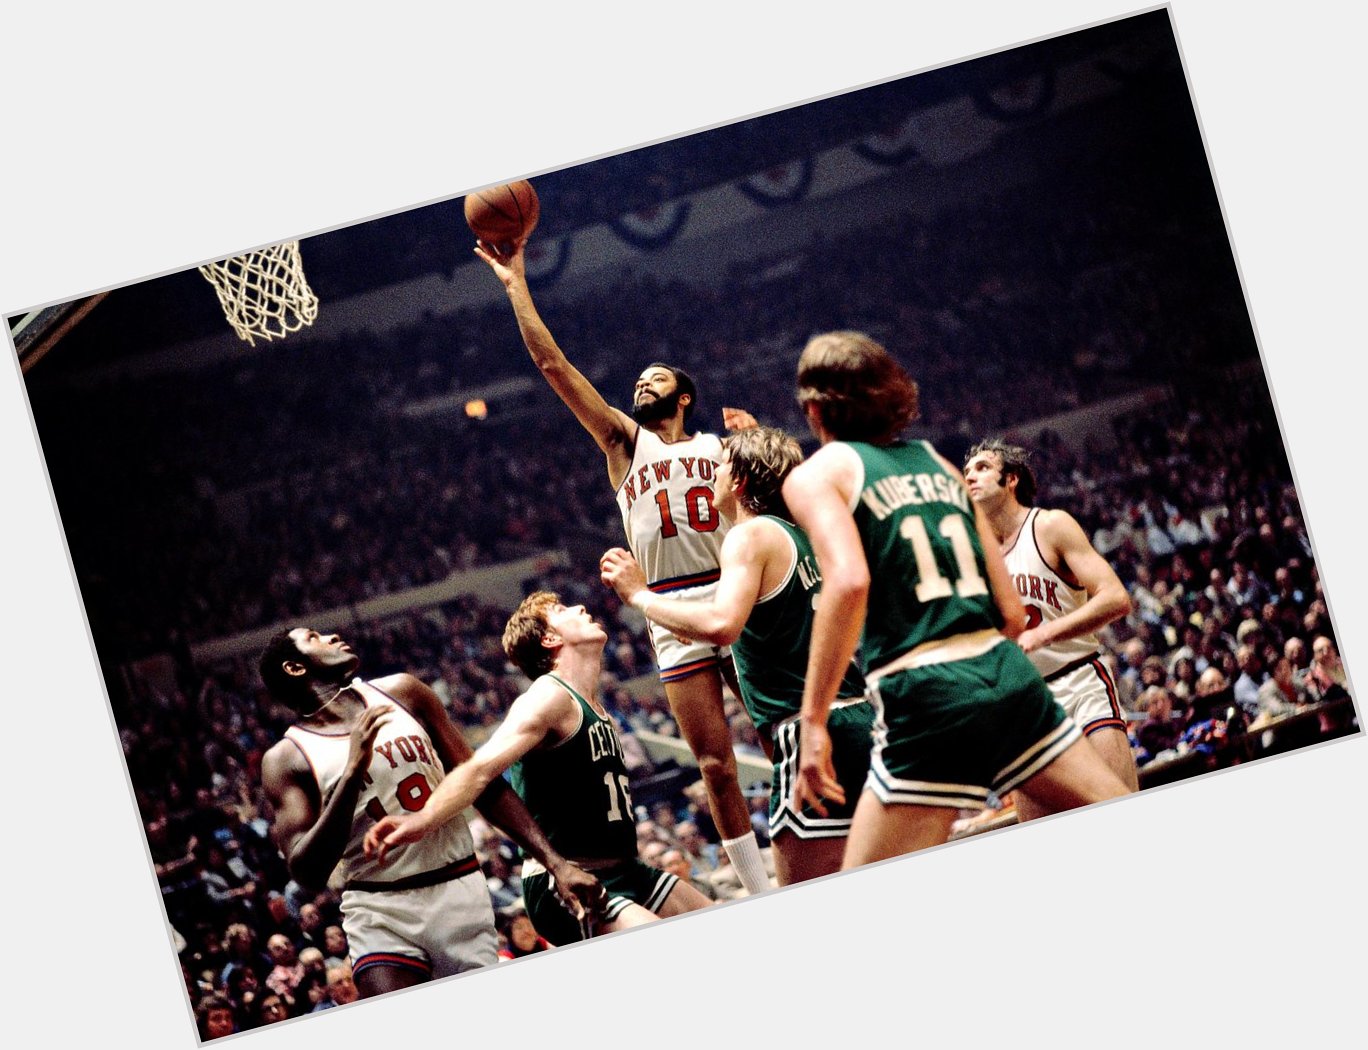 Happy Birthday to Hall of Famer, two-time Champ & Knicks legend, Walt Frazier. Defined \smooth\ in the 70s & beyond 